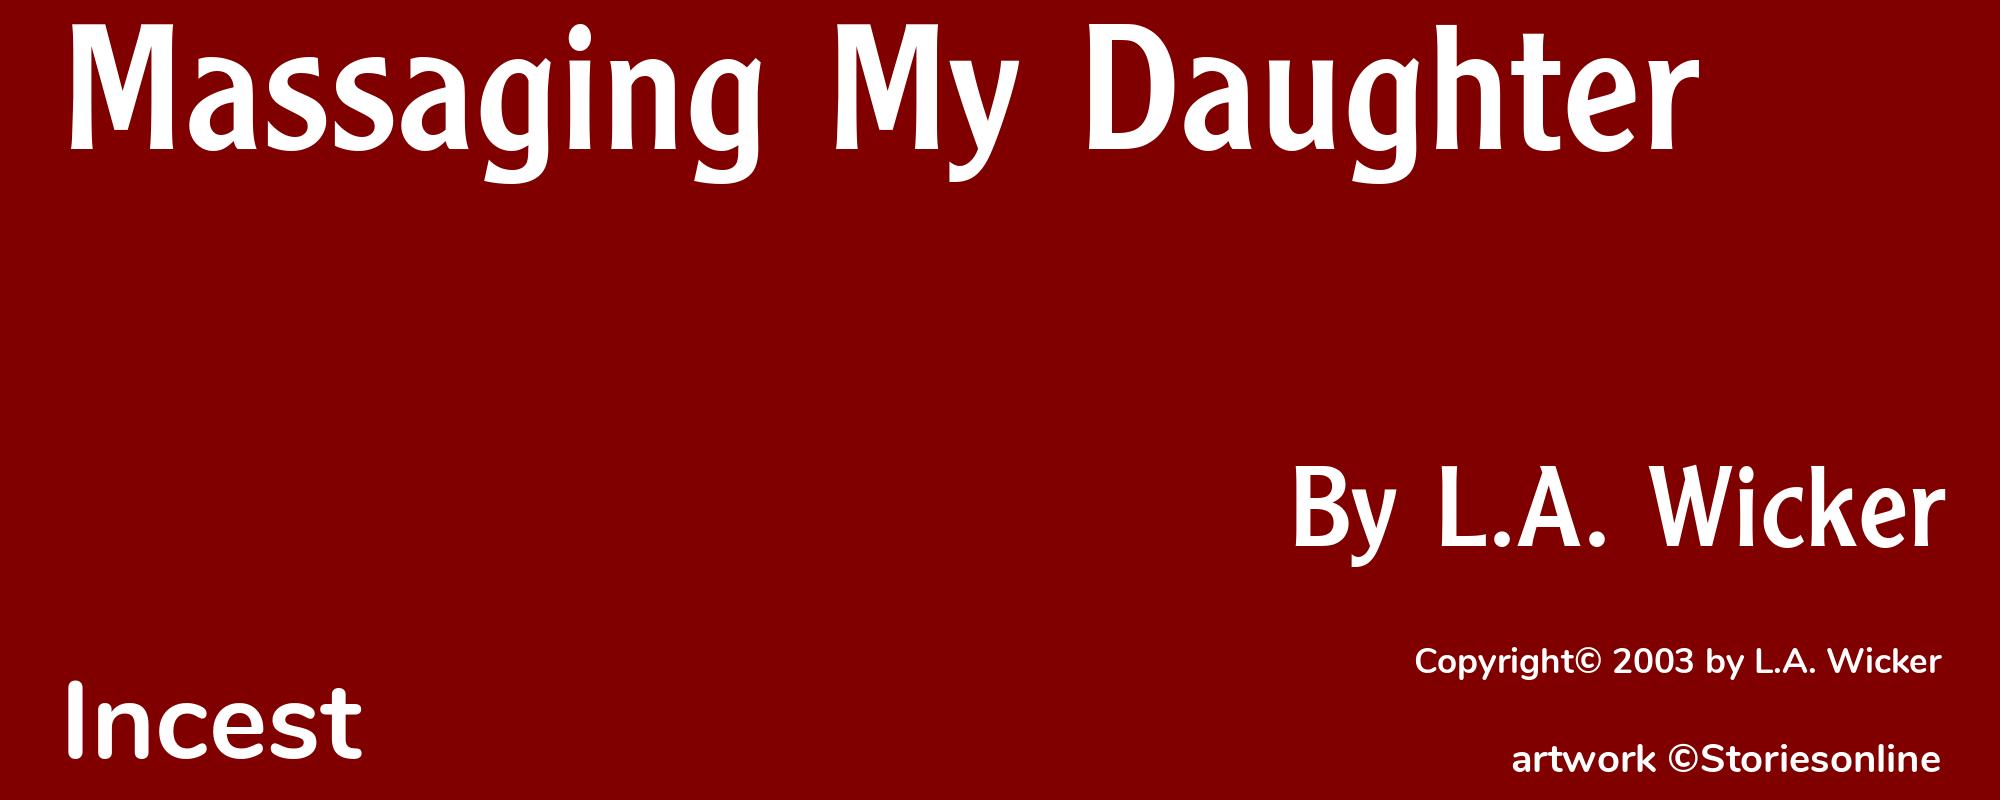 Massaging My Daughter - Cover